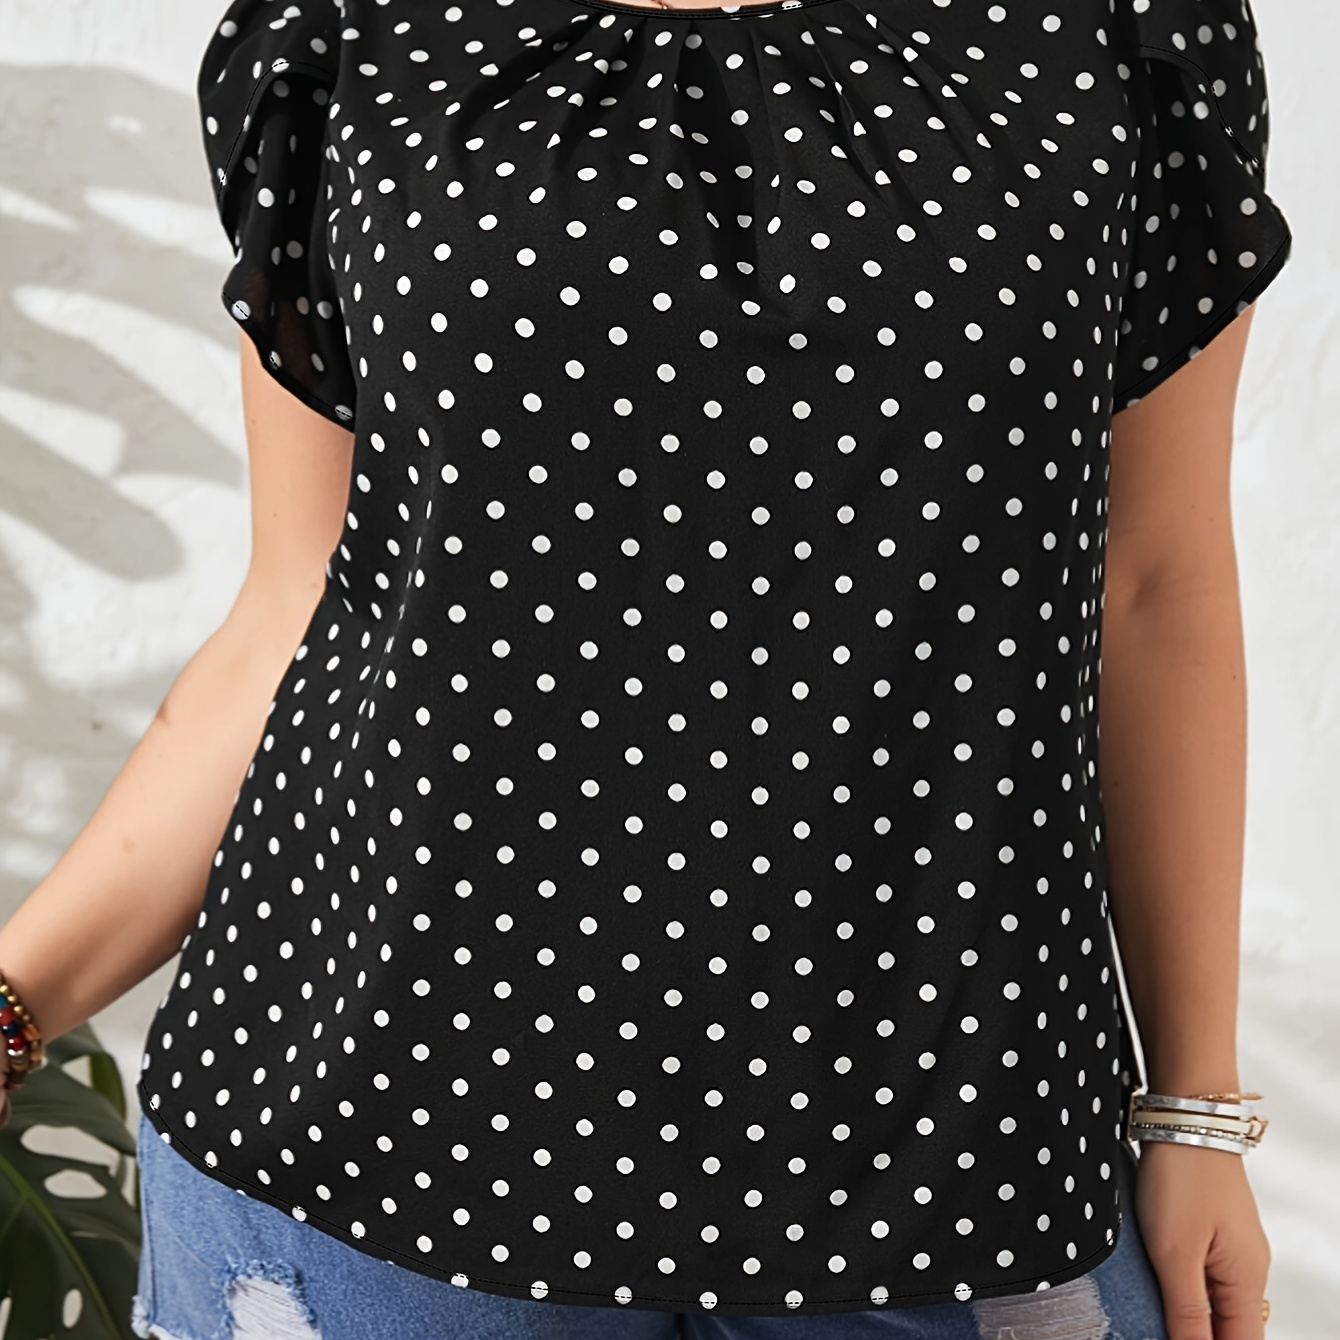 

Plus Size Polka Dot Print Top, Casual Crew Neck Short Sleeve Top, Women's Plus Size Clothing